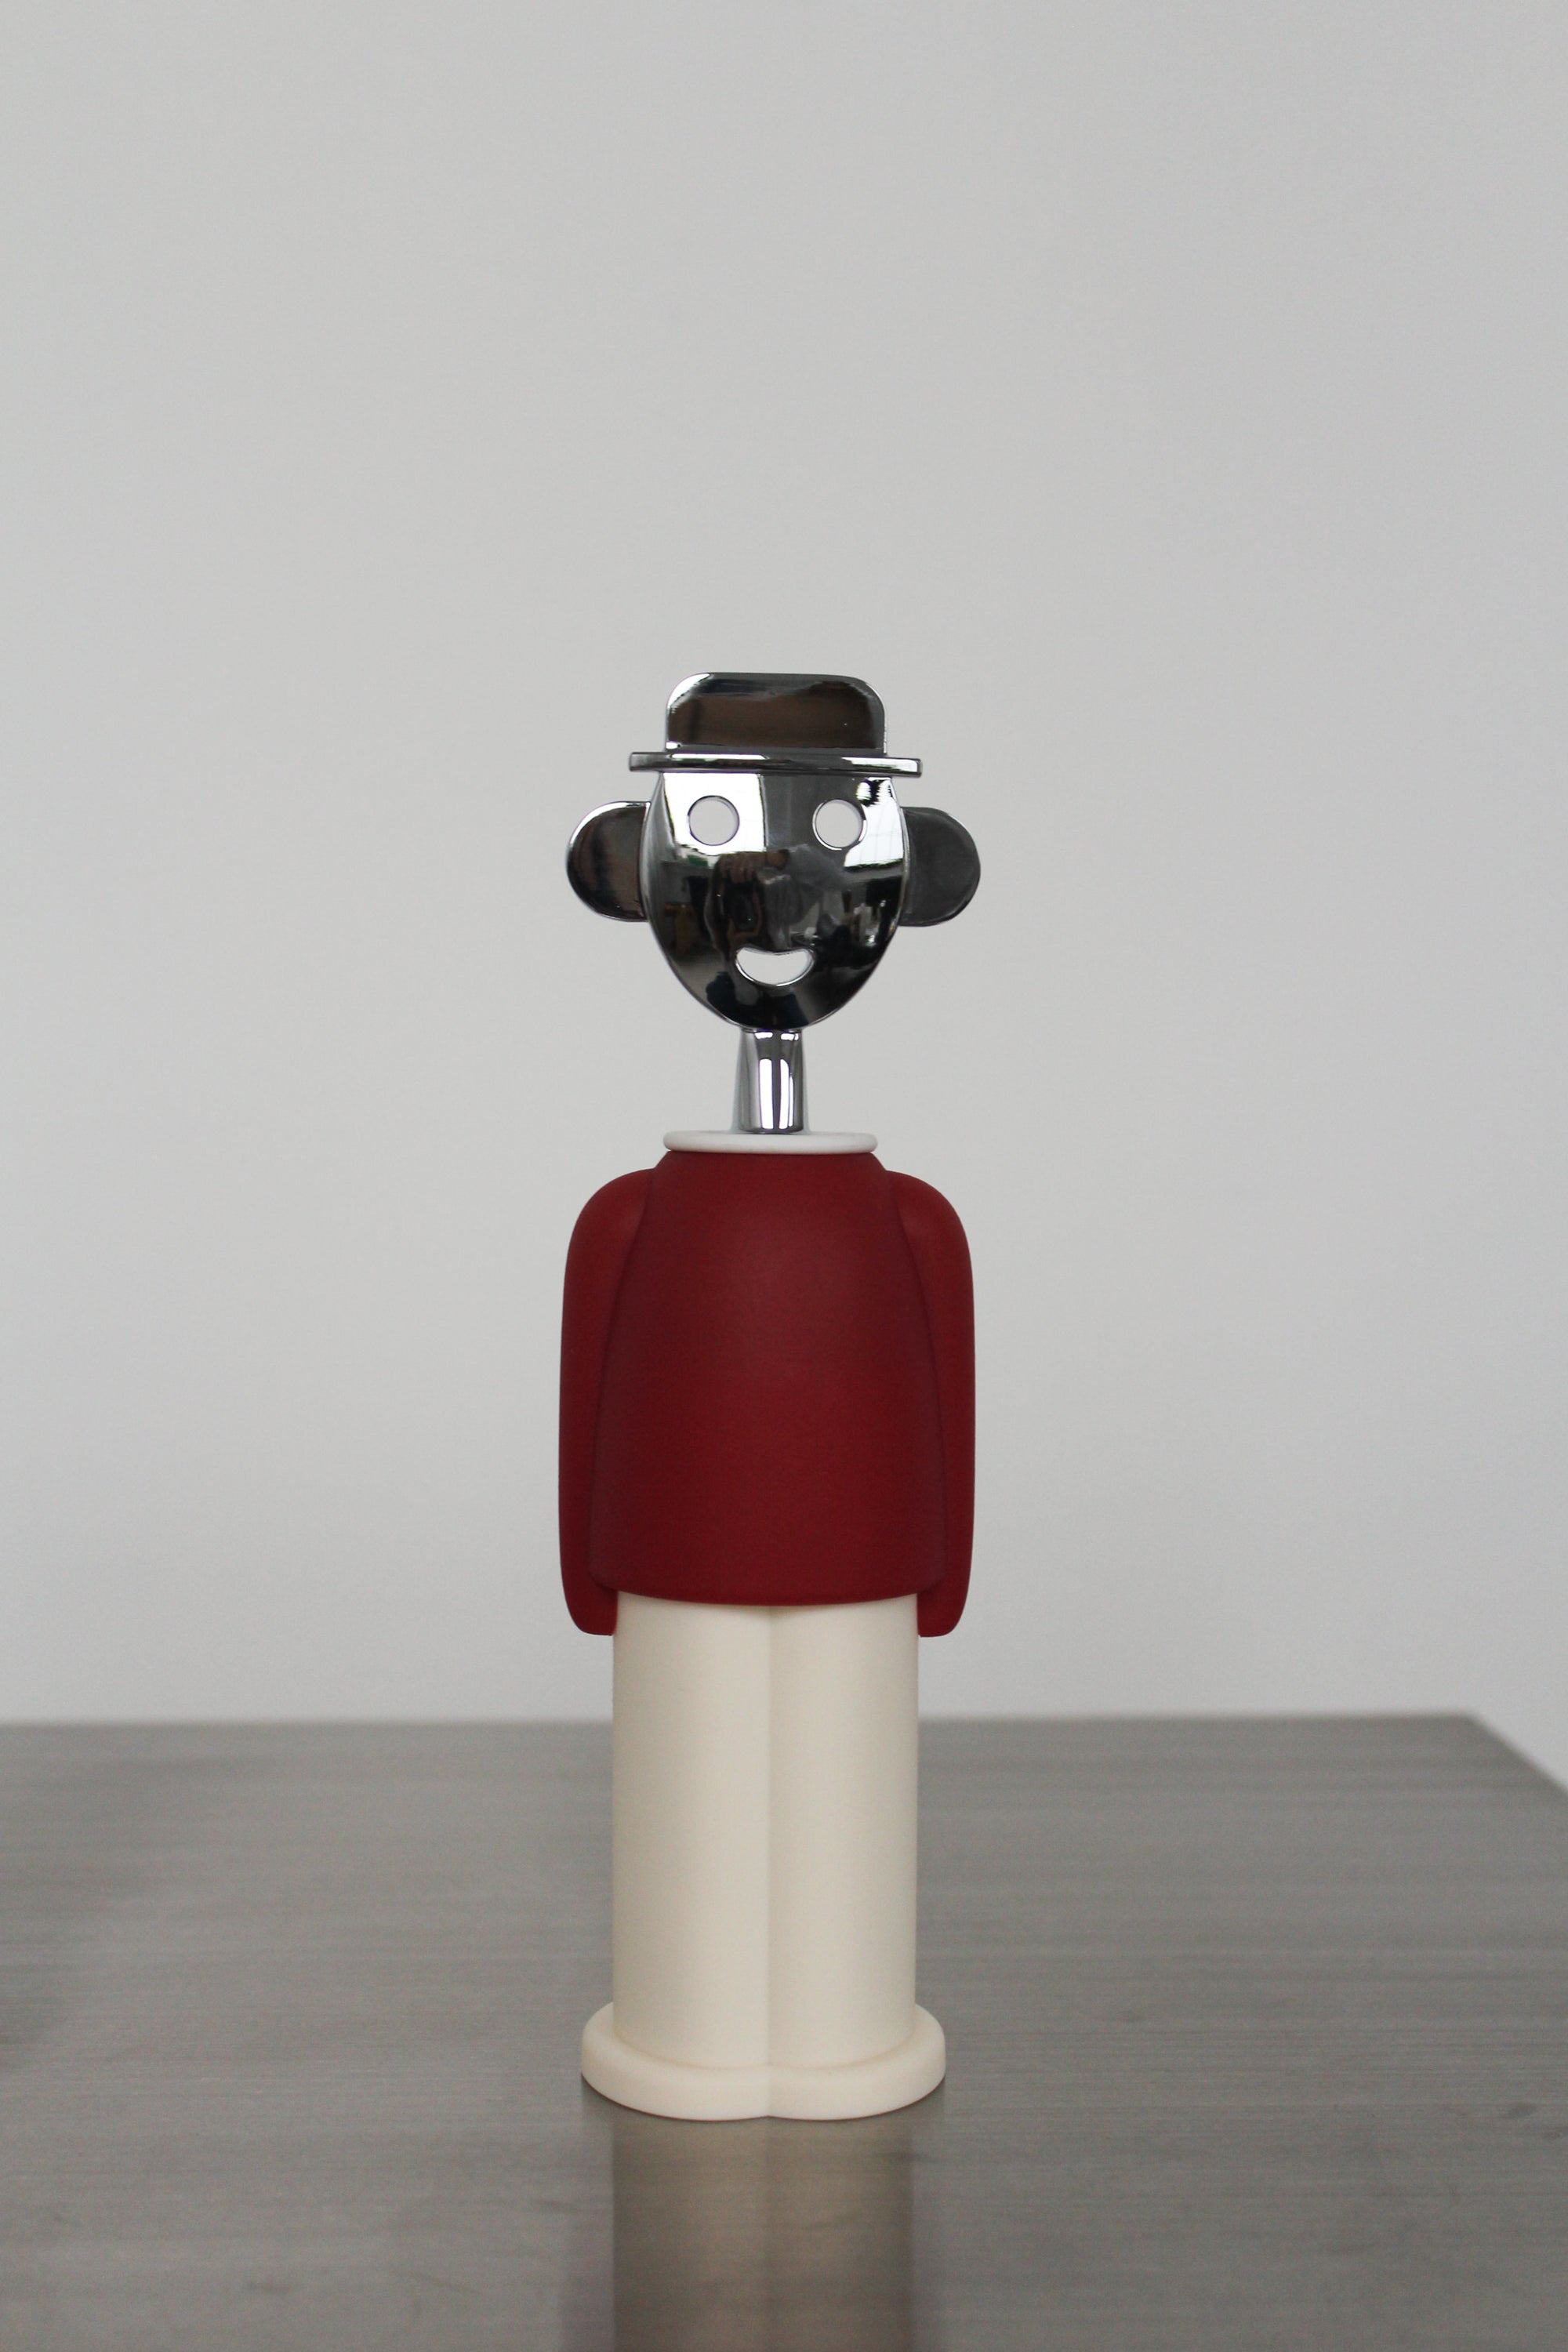 Alessandro M. Corkscrew by Alessi